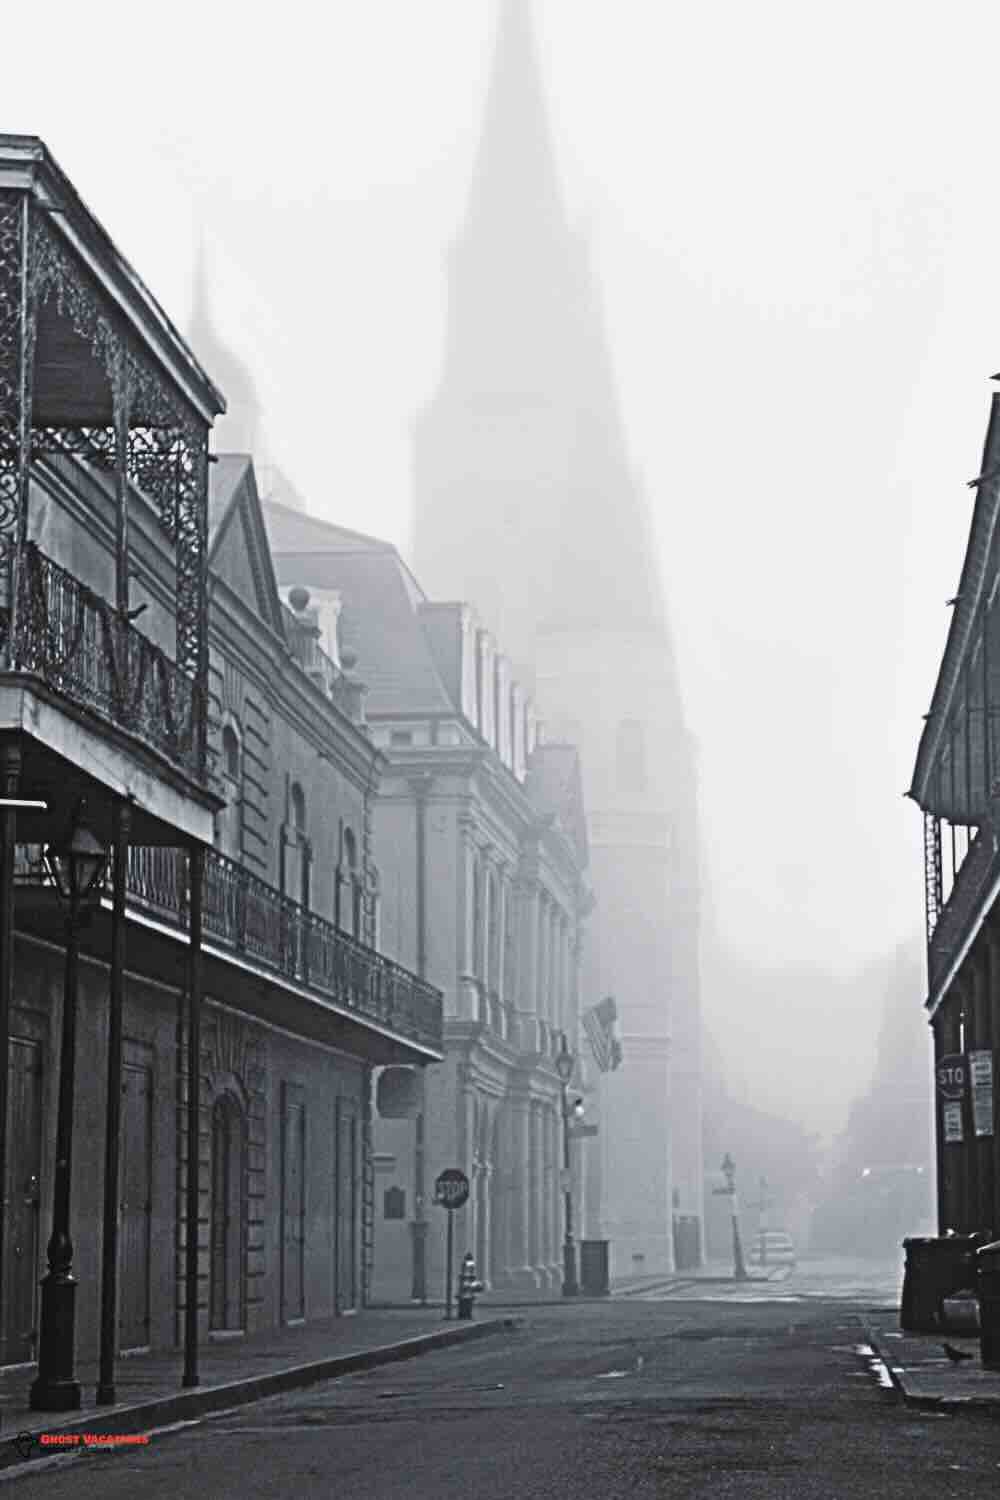 "French Quarter: A haunted hotel in New Orleans Louisiana, featuring iconic architecture, bustling streets, and a rich, ghostly history."